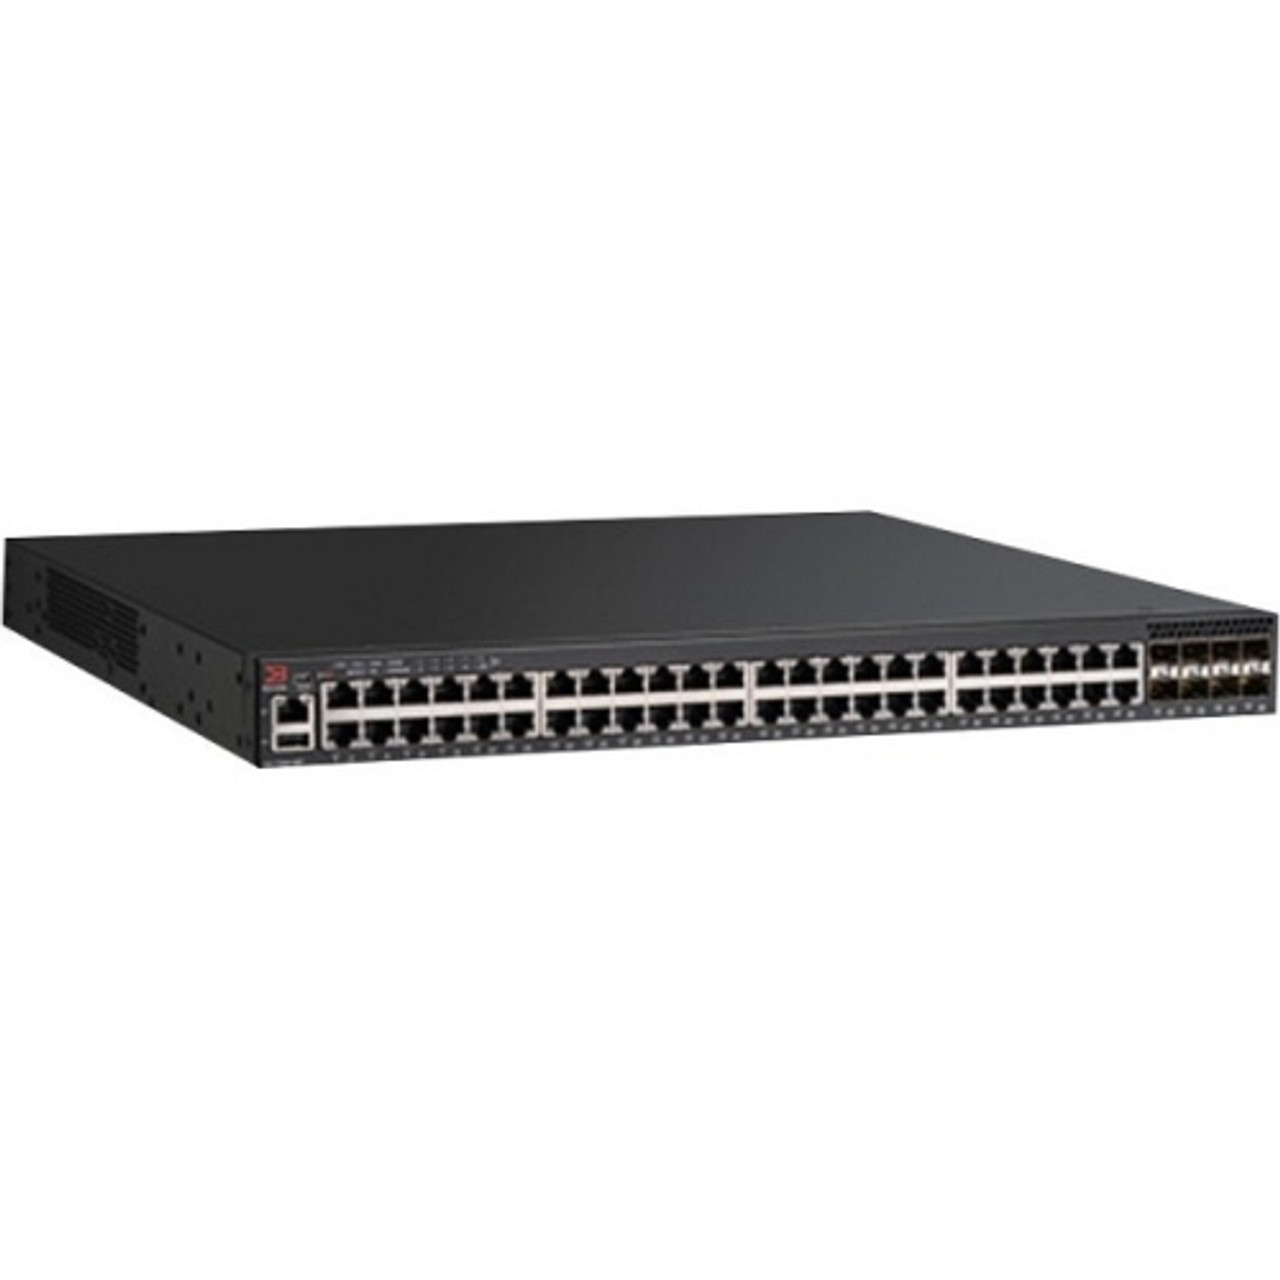 ICX7250-48-2X10G Brocade ICX 7250 Switch 48 Network, 10 Expansion Slot Manageable Optical Fiber, Twisted Pair Modular 3 Layer Supported 1U High Rack-mountable